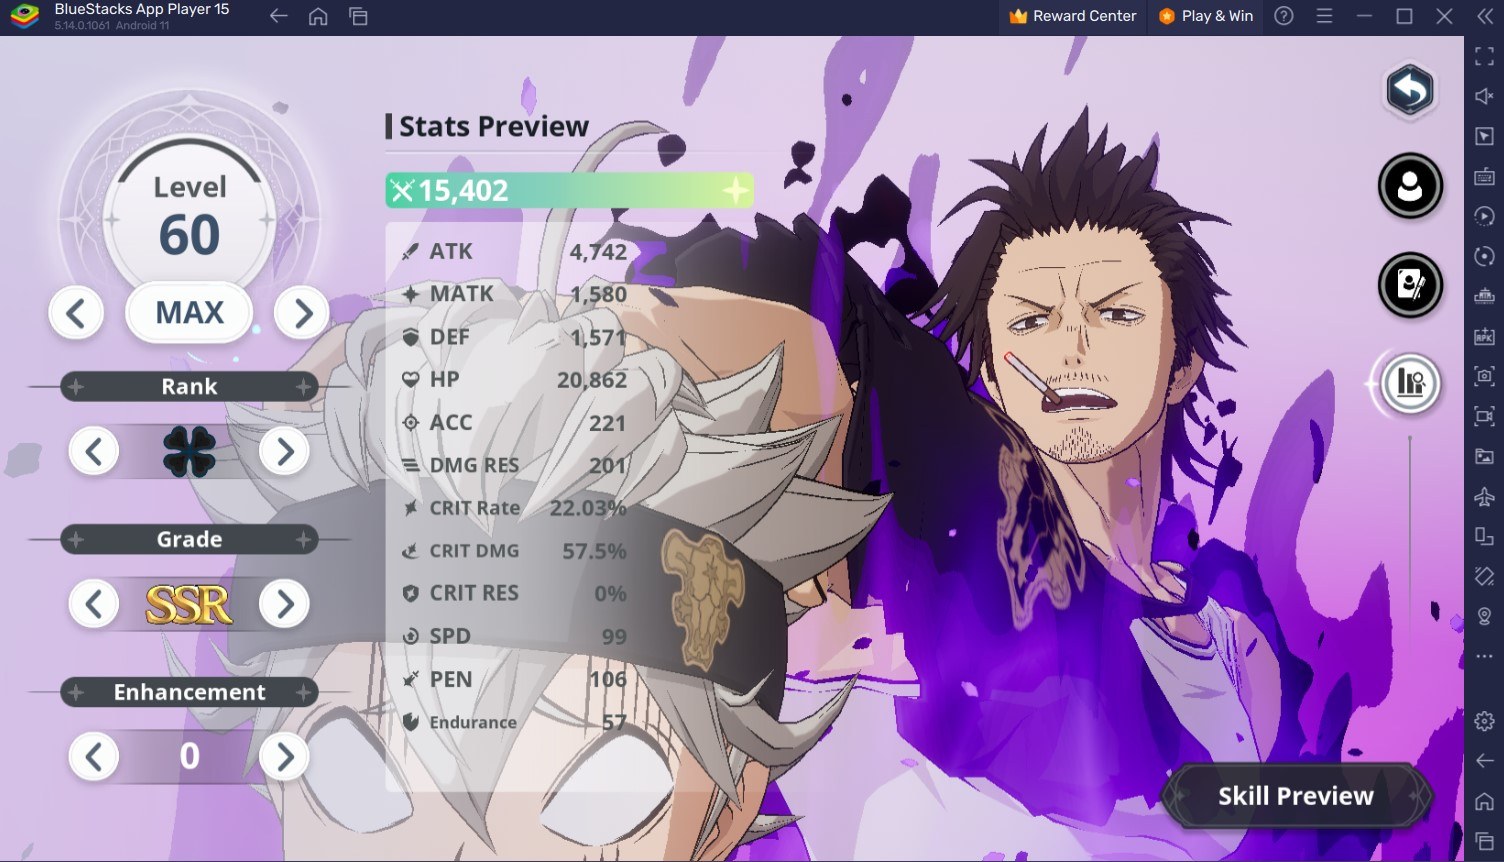 Black Clover M – Yami Sukehiro Skills, Stats, Gear Sets, and Team Recommendations